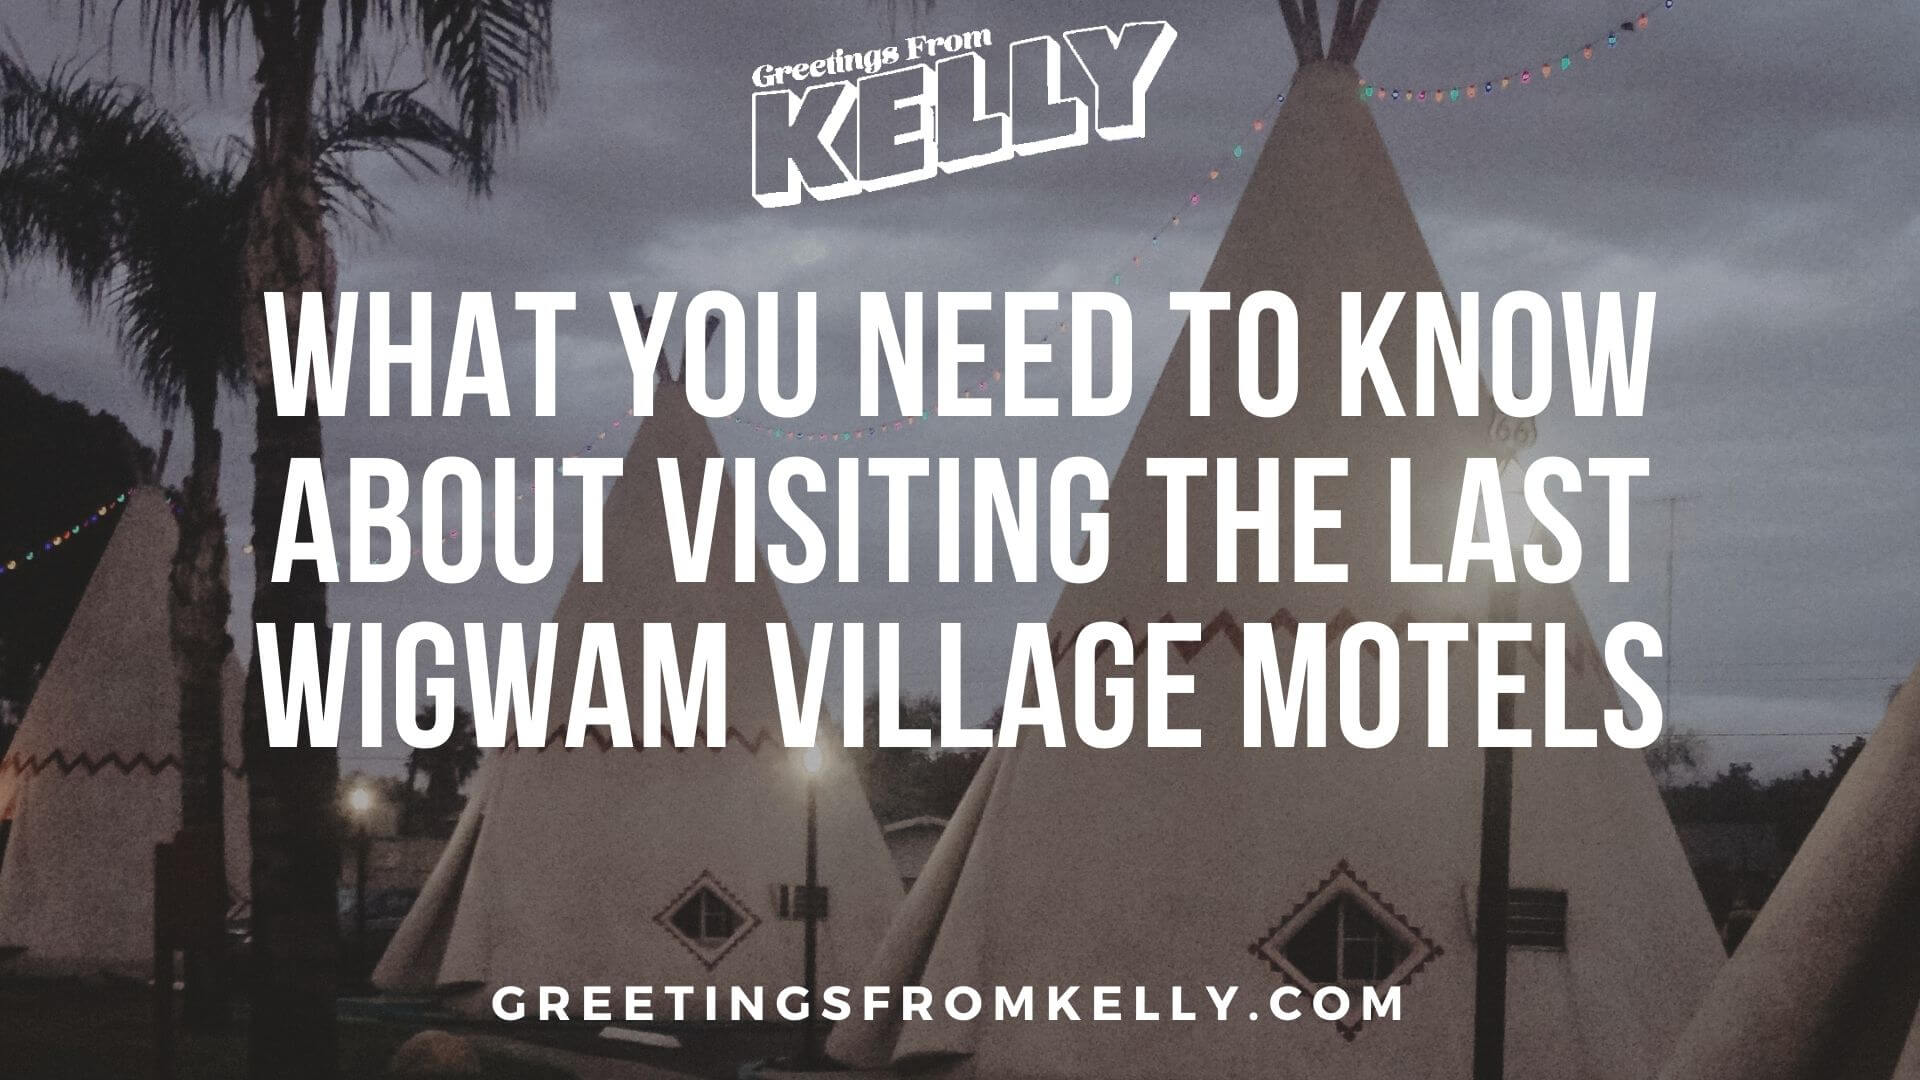 Visiting the Last Wigwam Village Motels in the United States